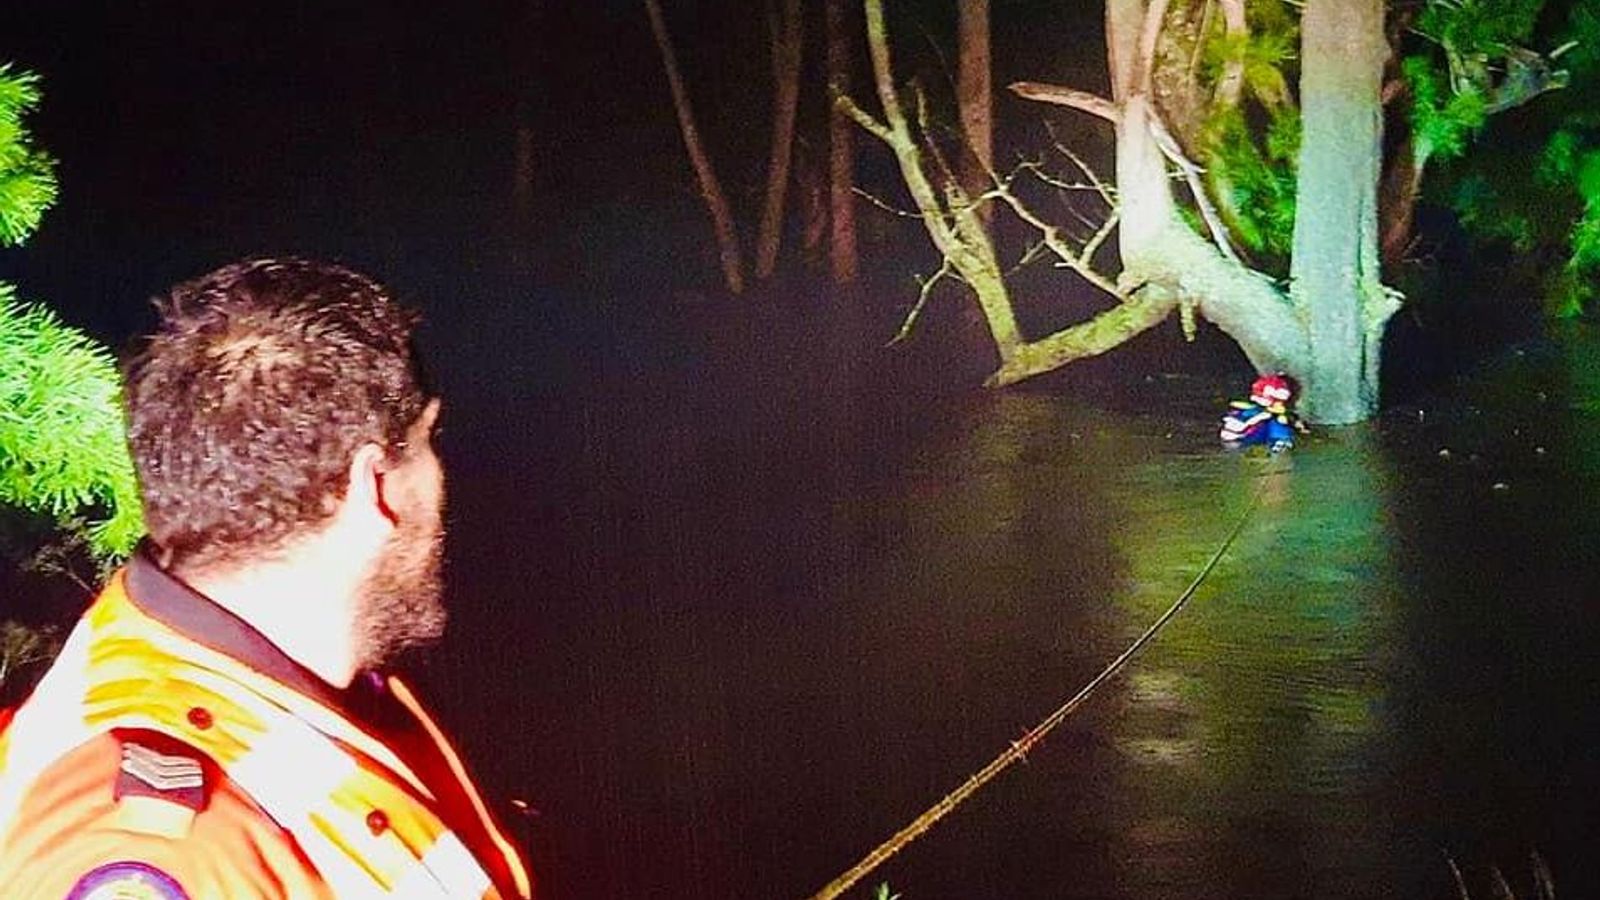 Man rescued from floods after 10 hours clinging to tree - Sky News